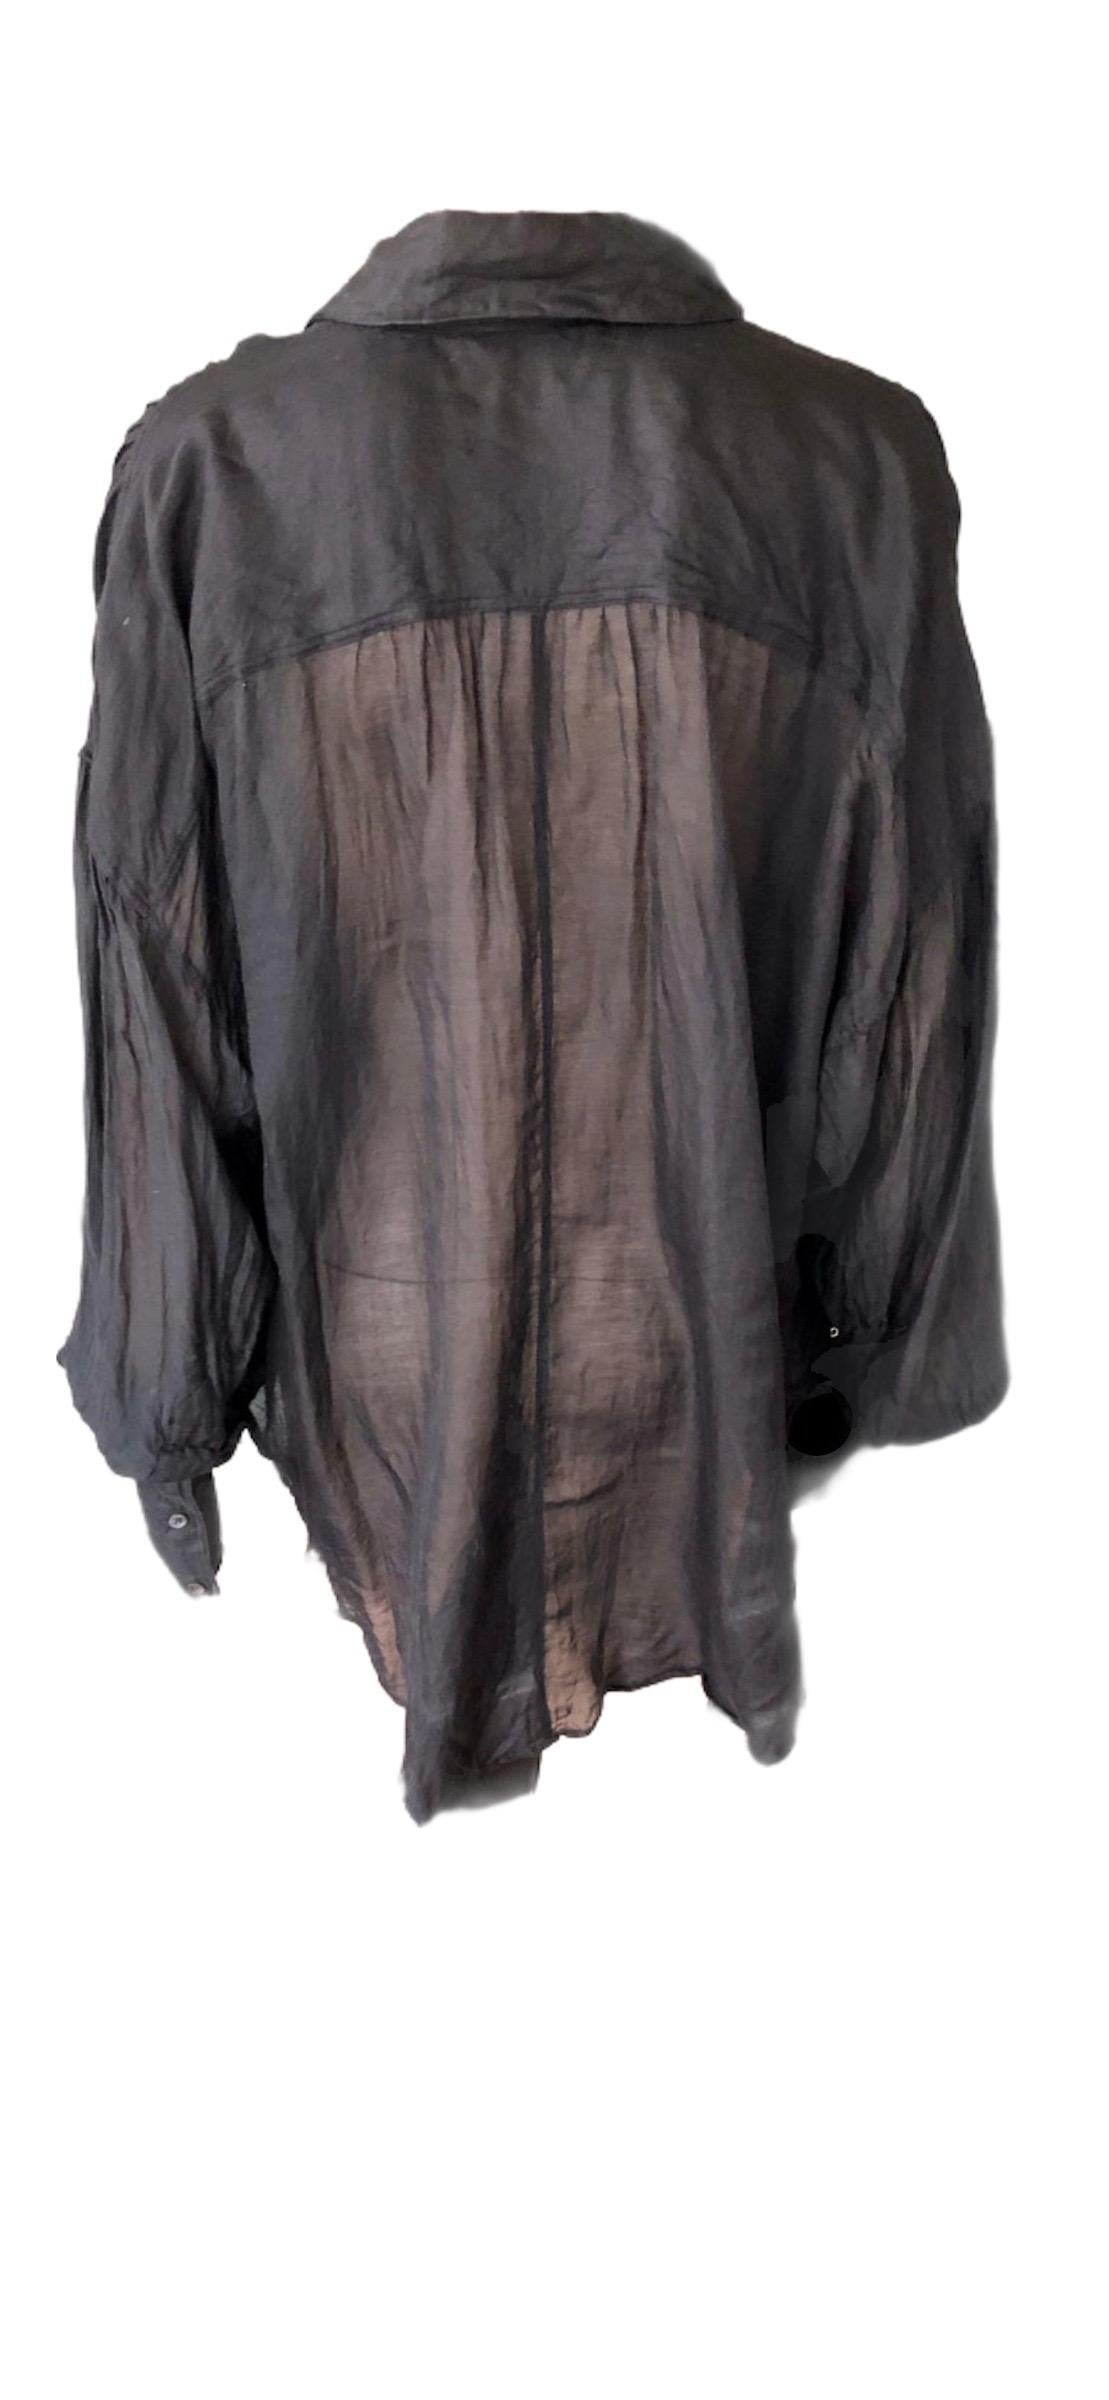 Tom Ford for Gucci F/W 2002 Sheer Plunging Lace-Up Black Tunic Shirt Blouse Top For Sale 1